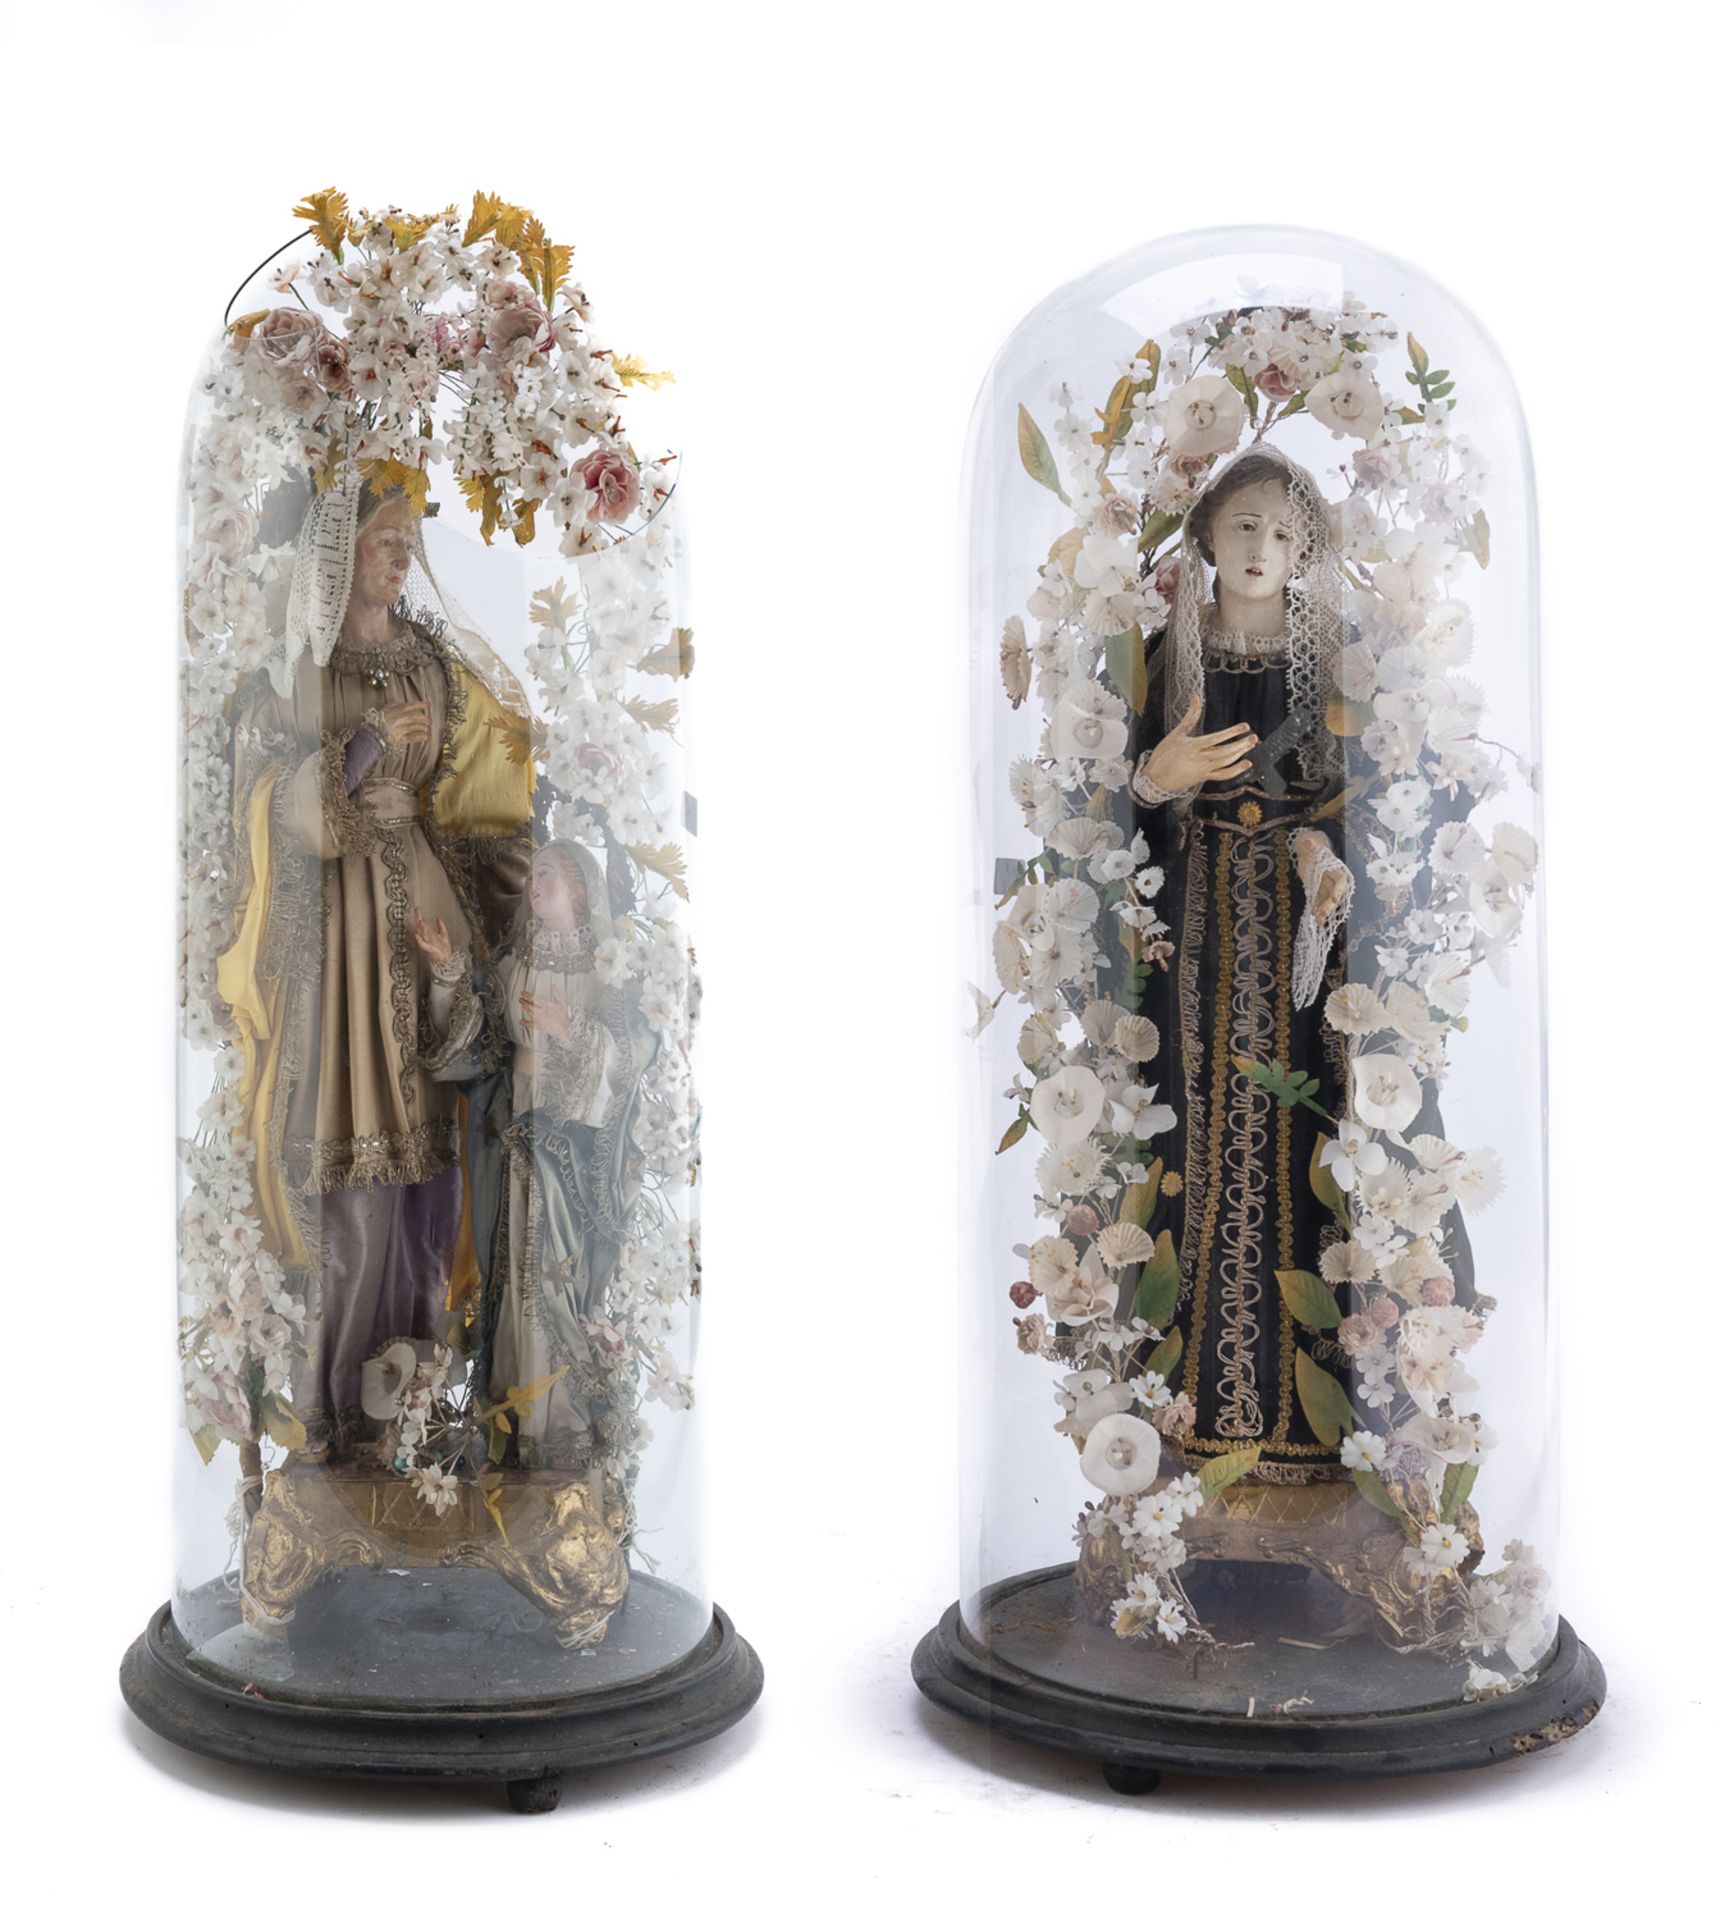 PAIR OF CRIB FIGURES NAPLES EARLY 20TH CENTURY